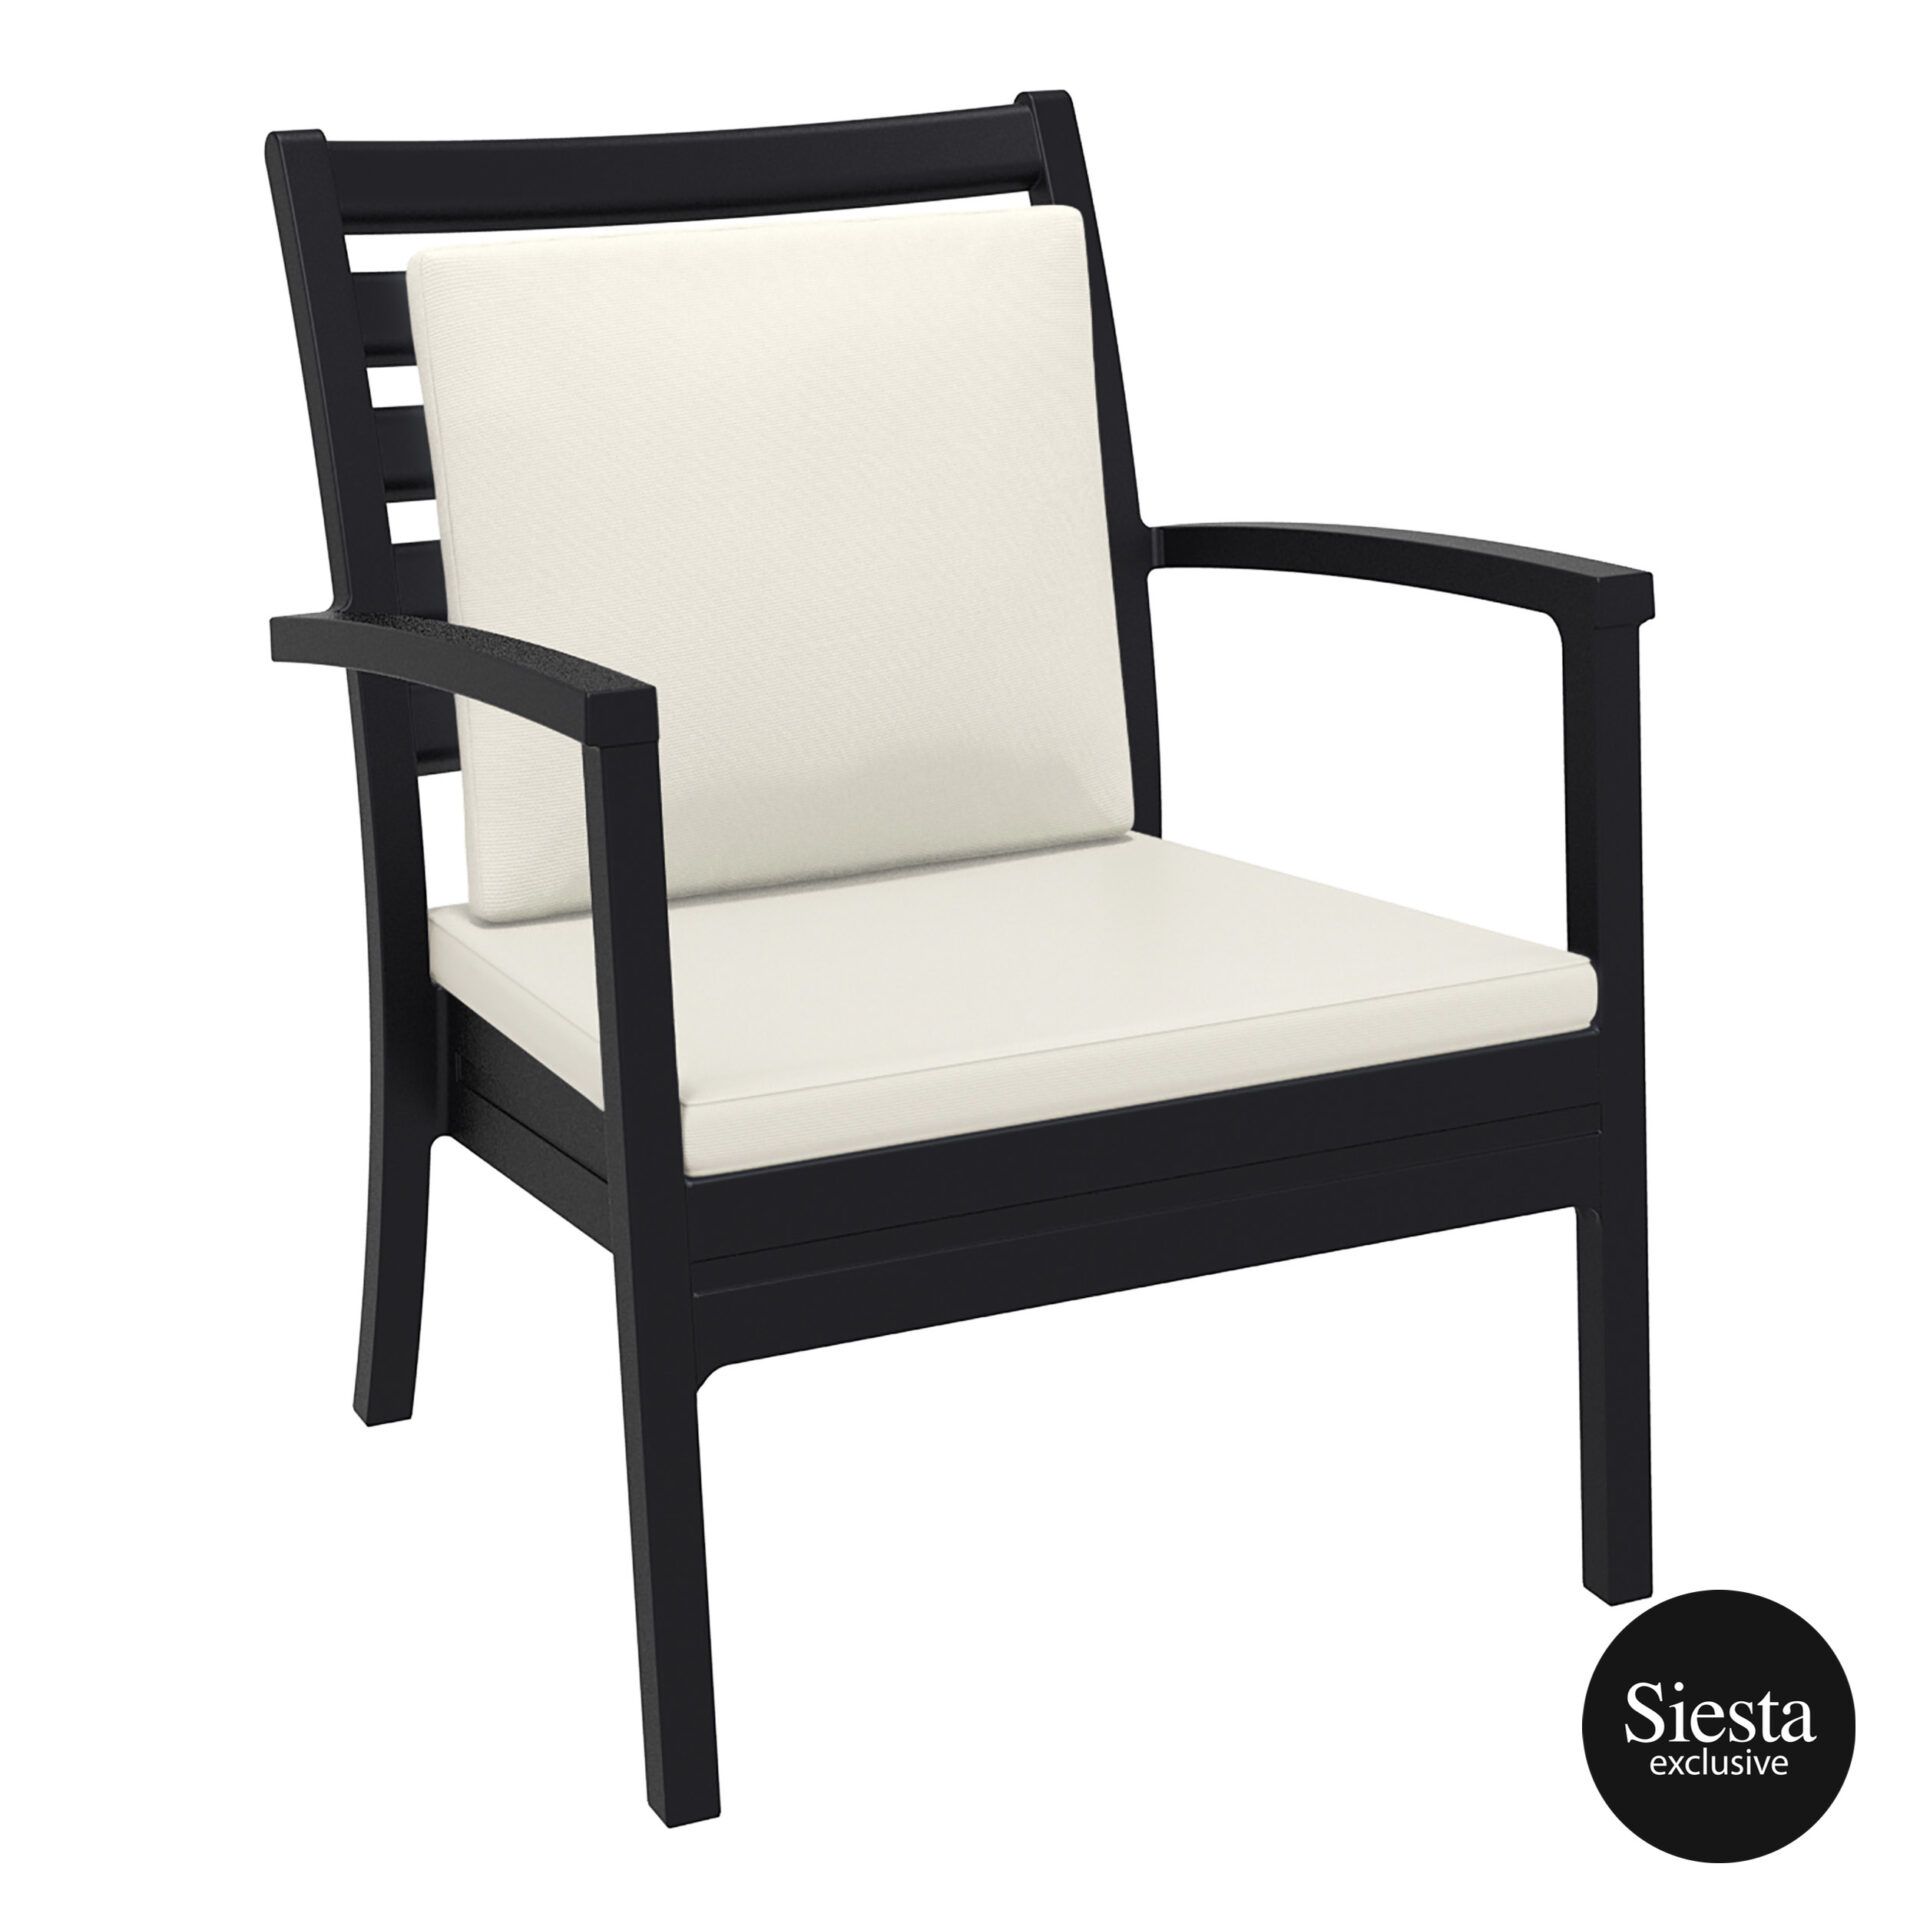 Artemis XL Armchair - Black with Beige Seat and Back Cushion